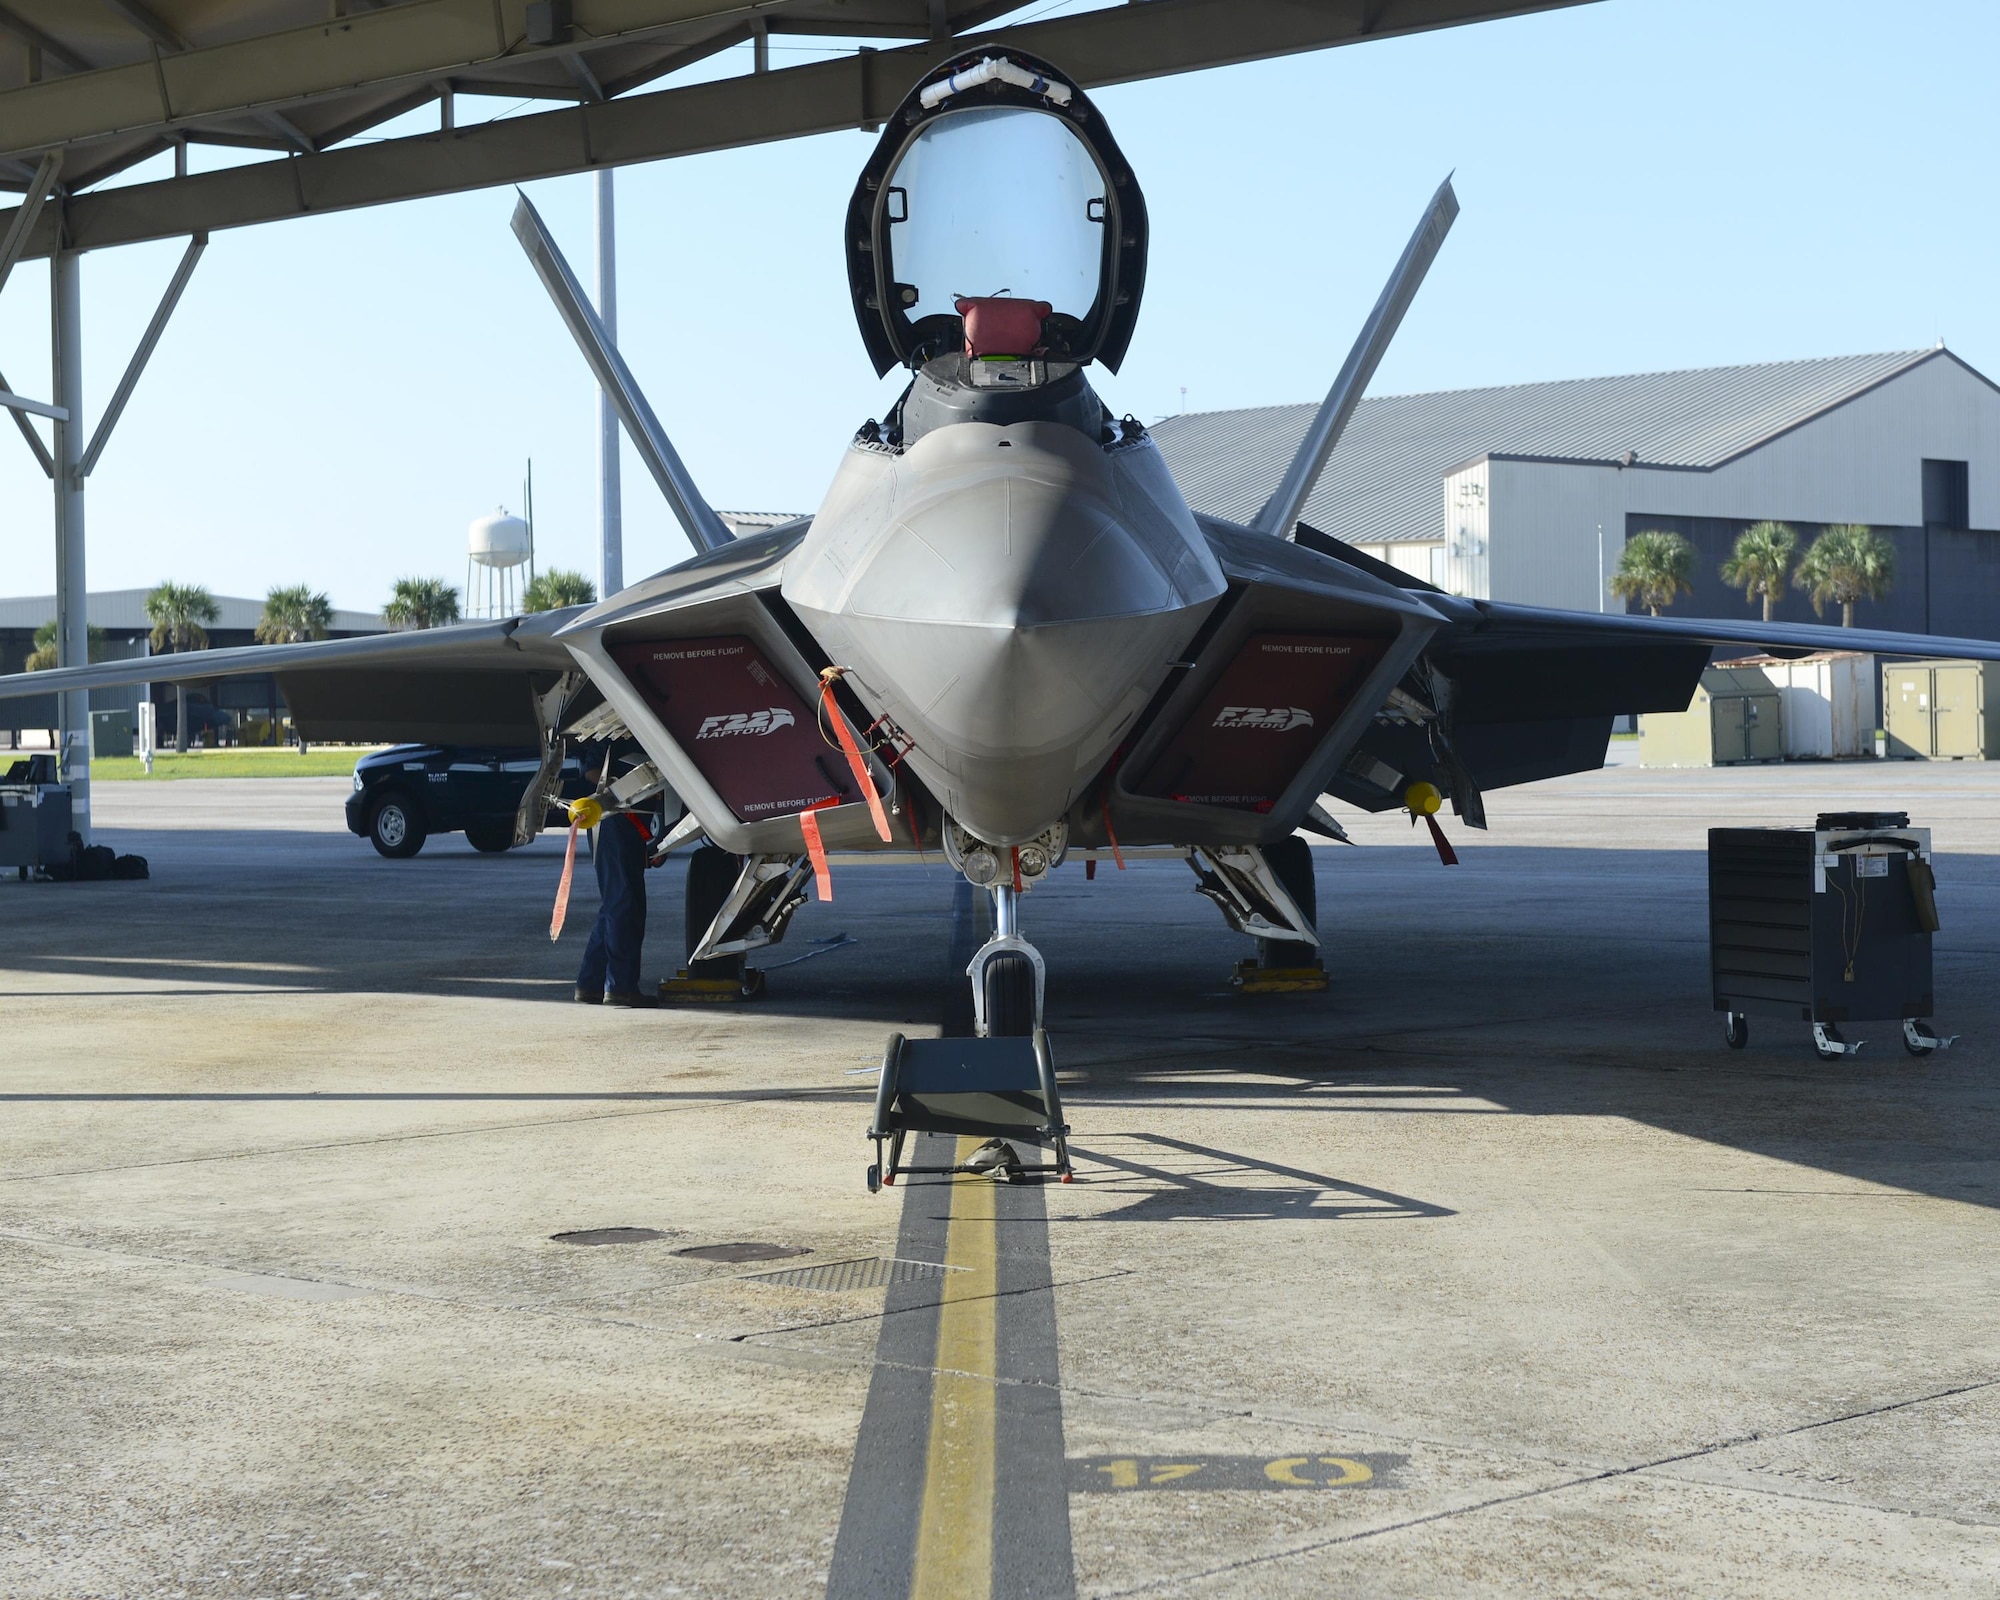 An F-22 Raptor is prepped for take-off by maintainers from the 44th Fighter Group on the flight line at Tyndall Air Force Base, Fla., Sept. 10, 2016. The unit accomplishes their mission of projecting unrivaled air combat power through Total Force Integration; most of the Airmen in the 44th FG are reservists who support their active duty counterparts in the 95th Fighter Squadron. (U.S. Air Force photo by Airman 1st Class Cody R. Miller/Released)